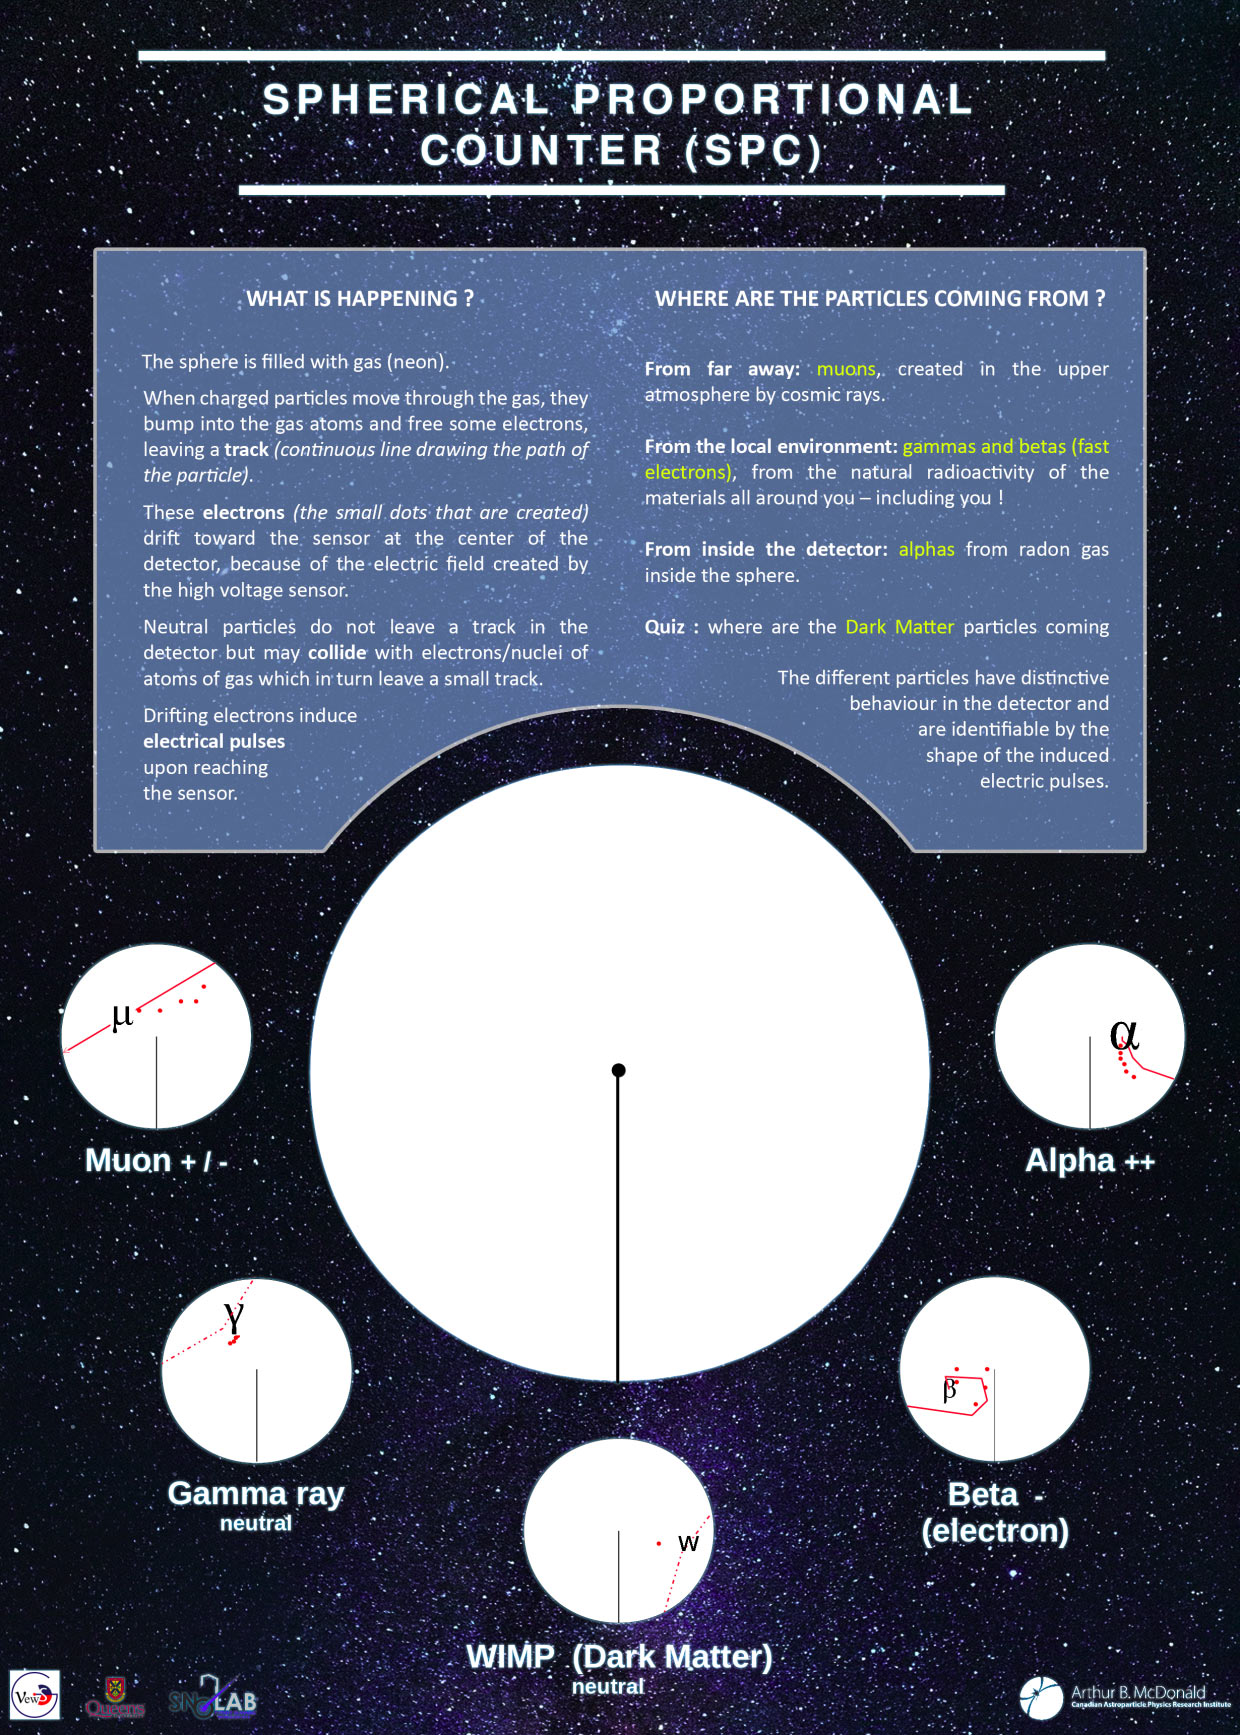 Spherical Proportional Counter (SPC) poster